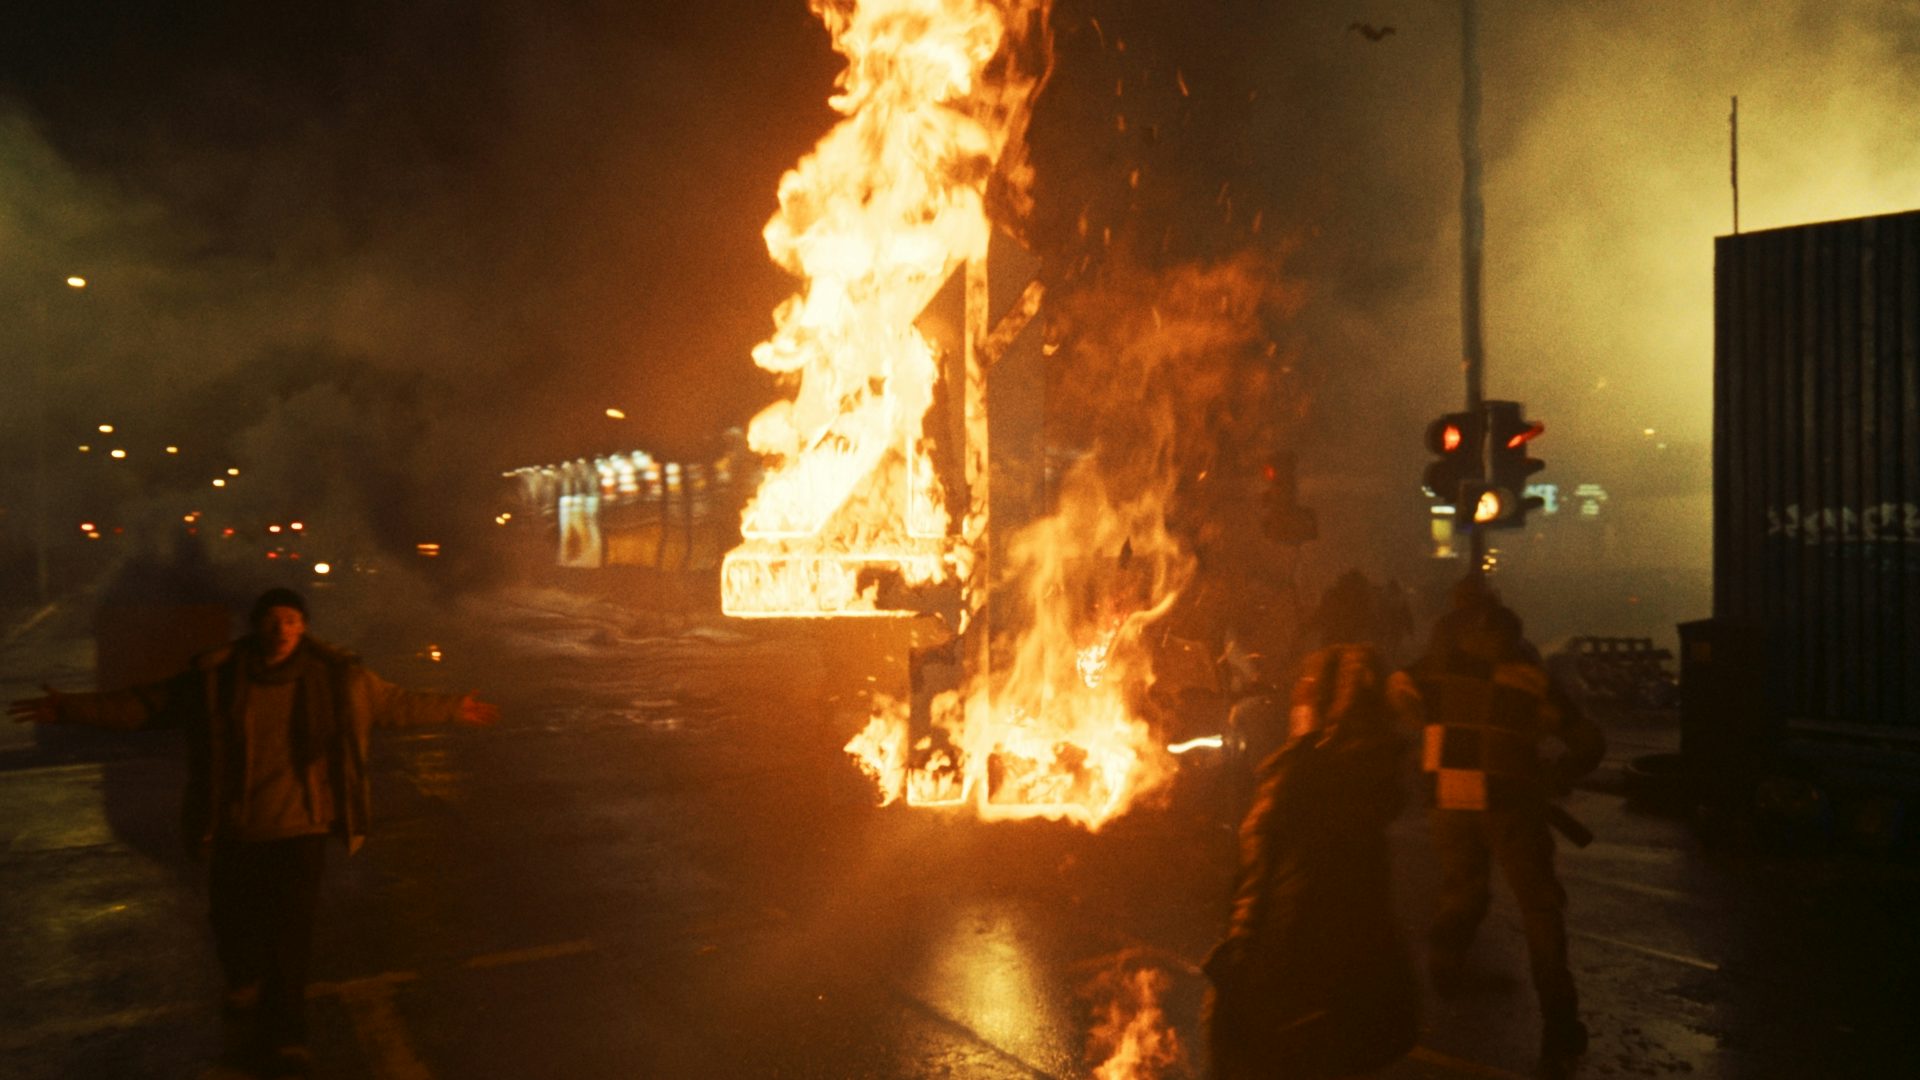 Still image from the new Channel 4 idents showing the 4 logo in flames at the centre of a dark street